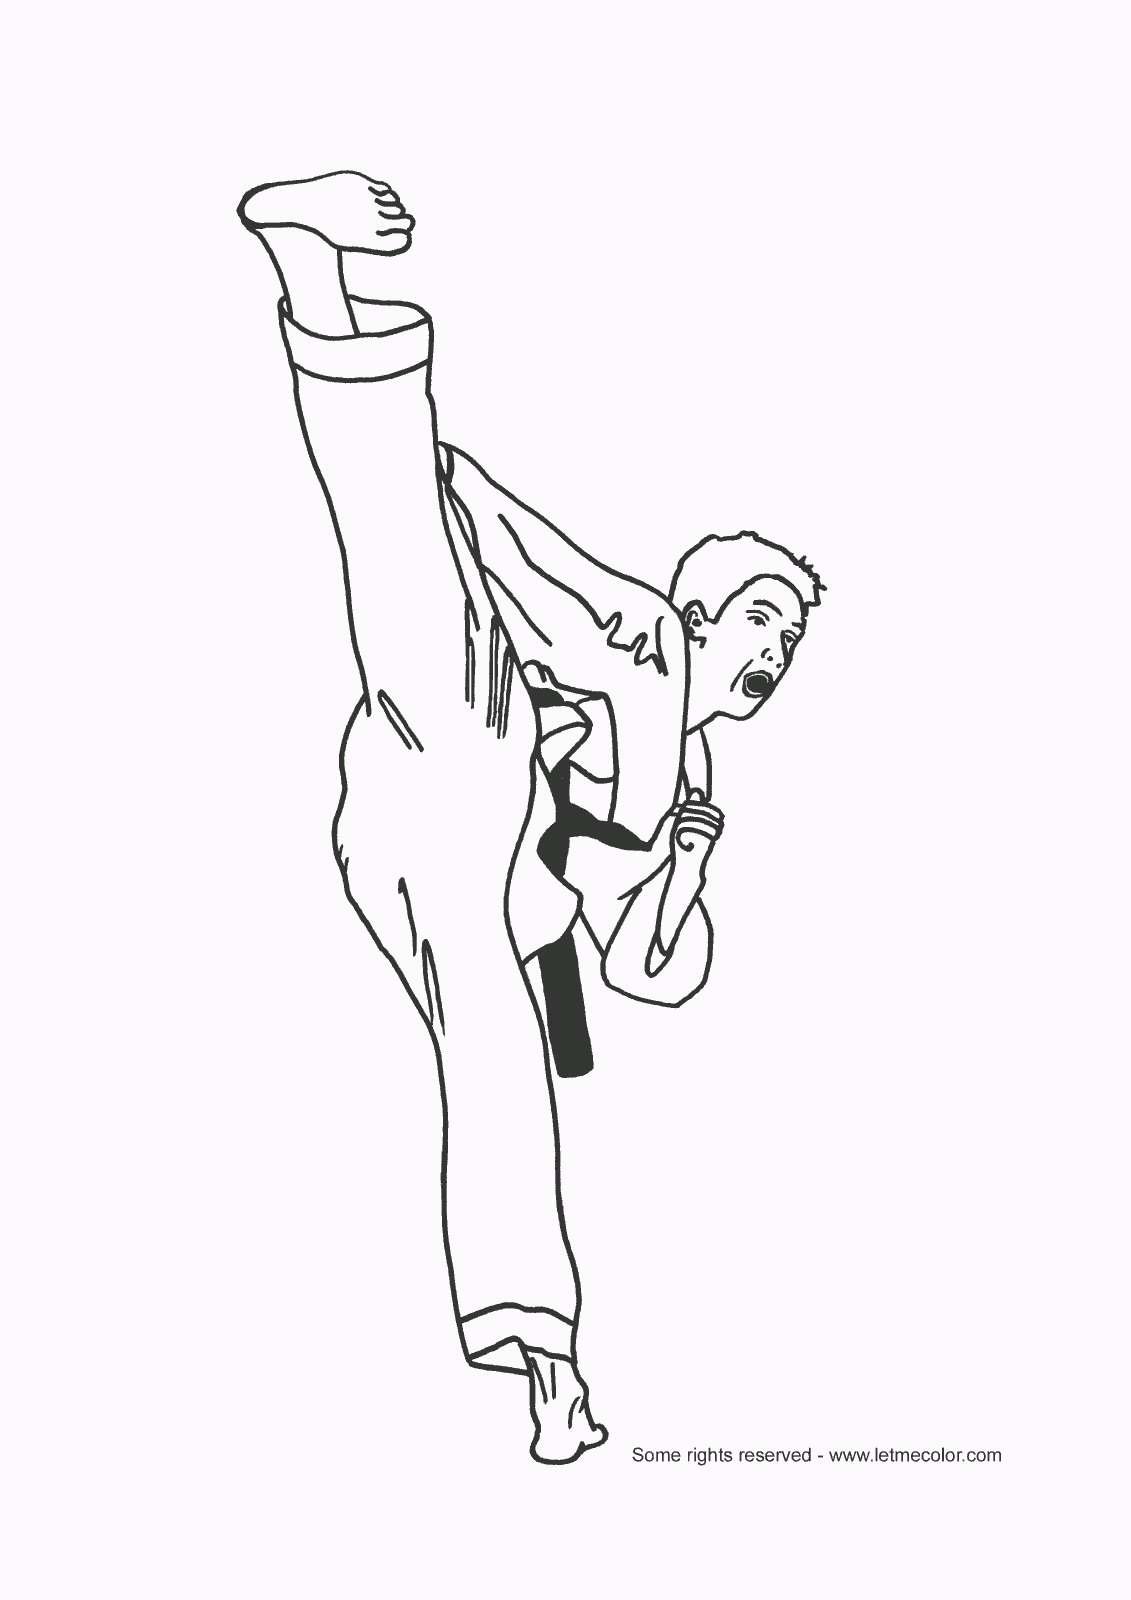 Karate Coloring Pages For Kids | Pose References | Pinterest | Free - Free Printable Karate Coloring Pages